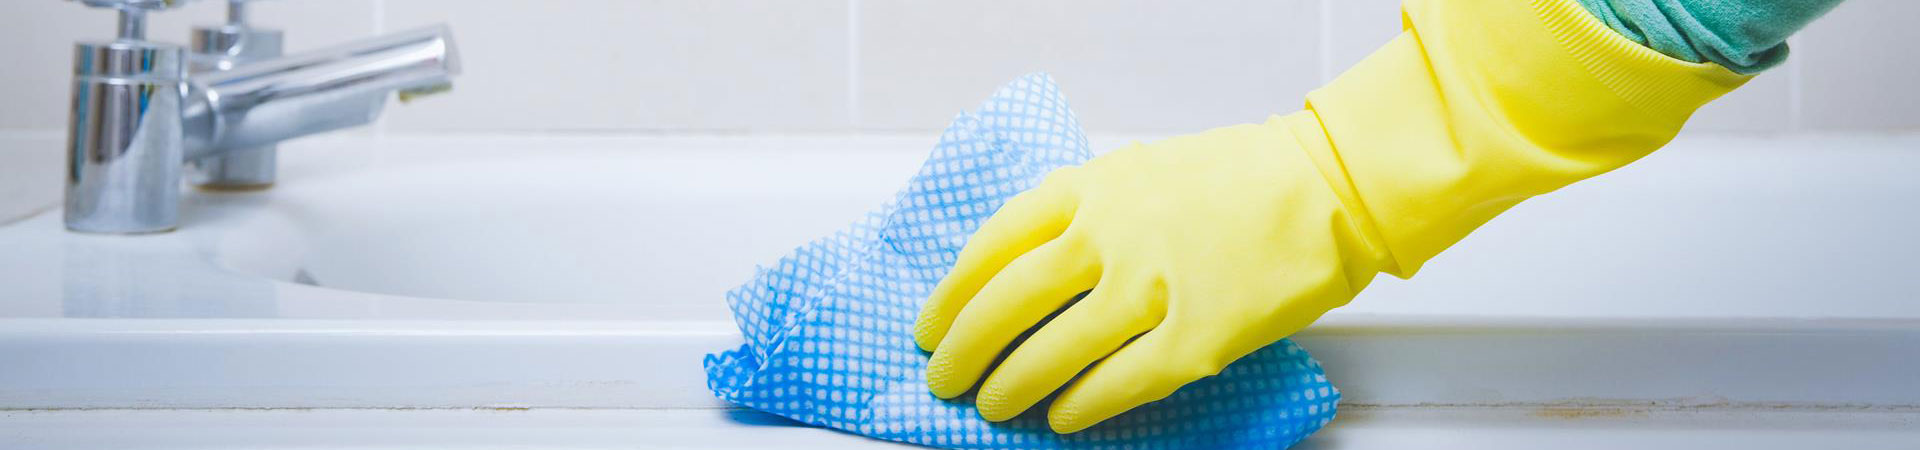 Bathroom Cleaning Service